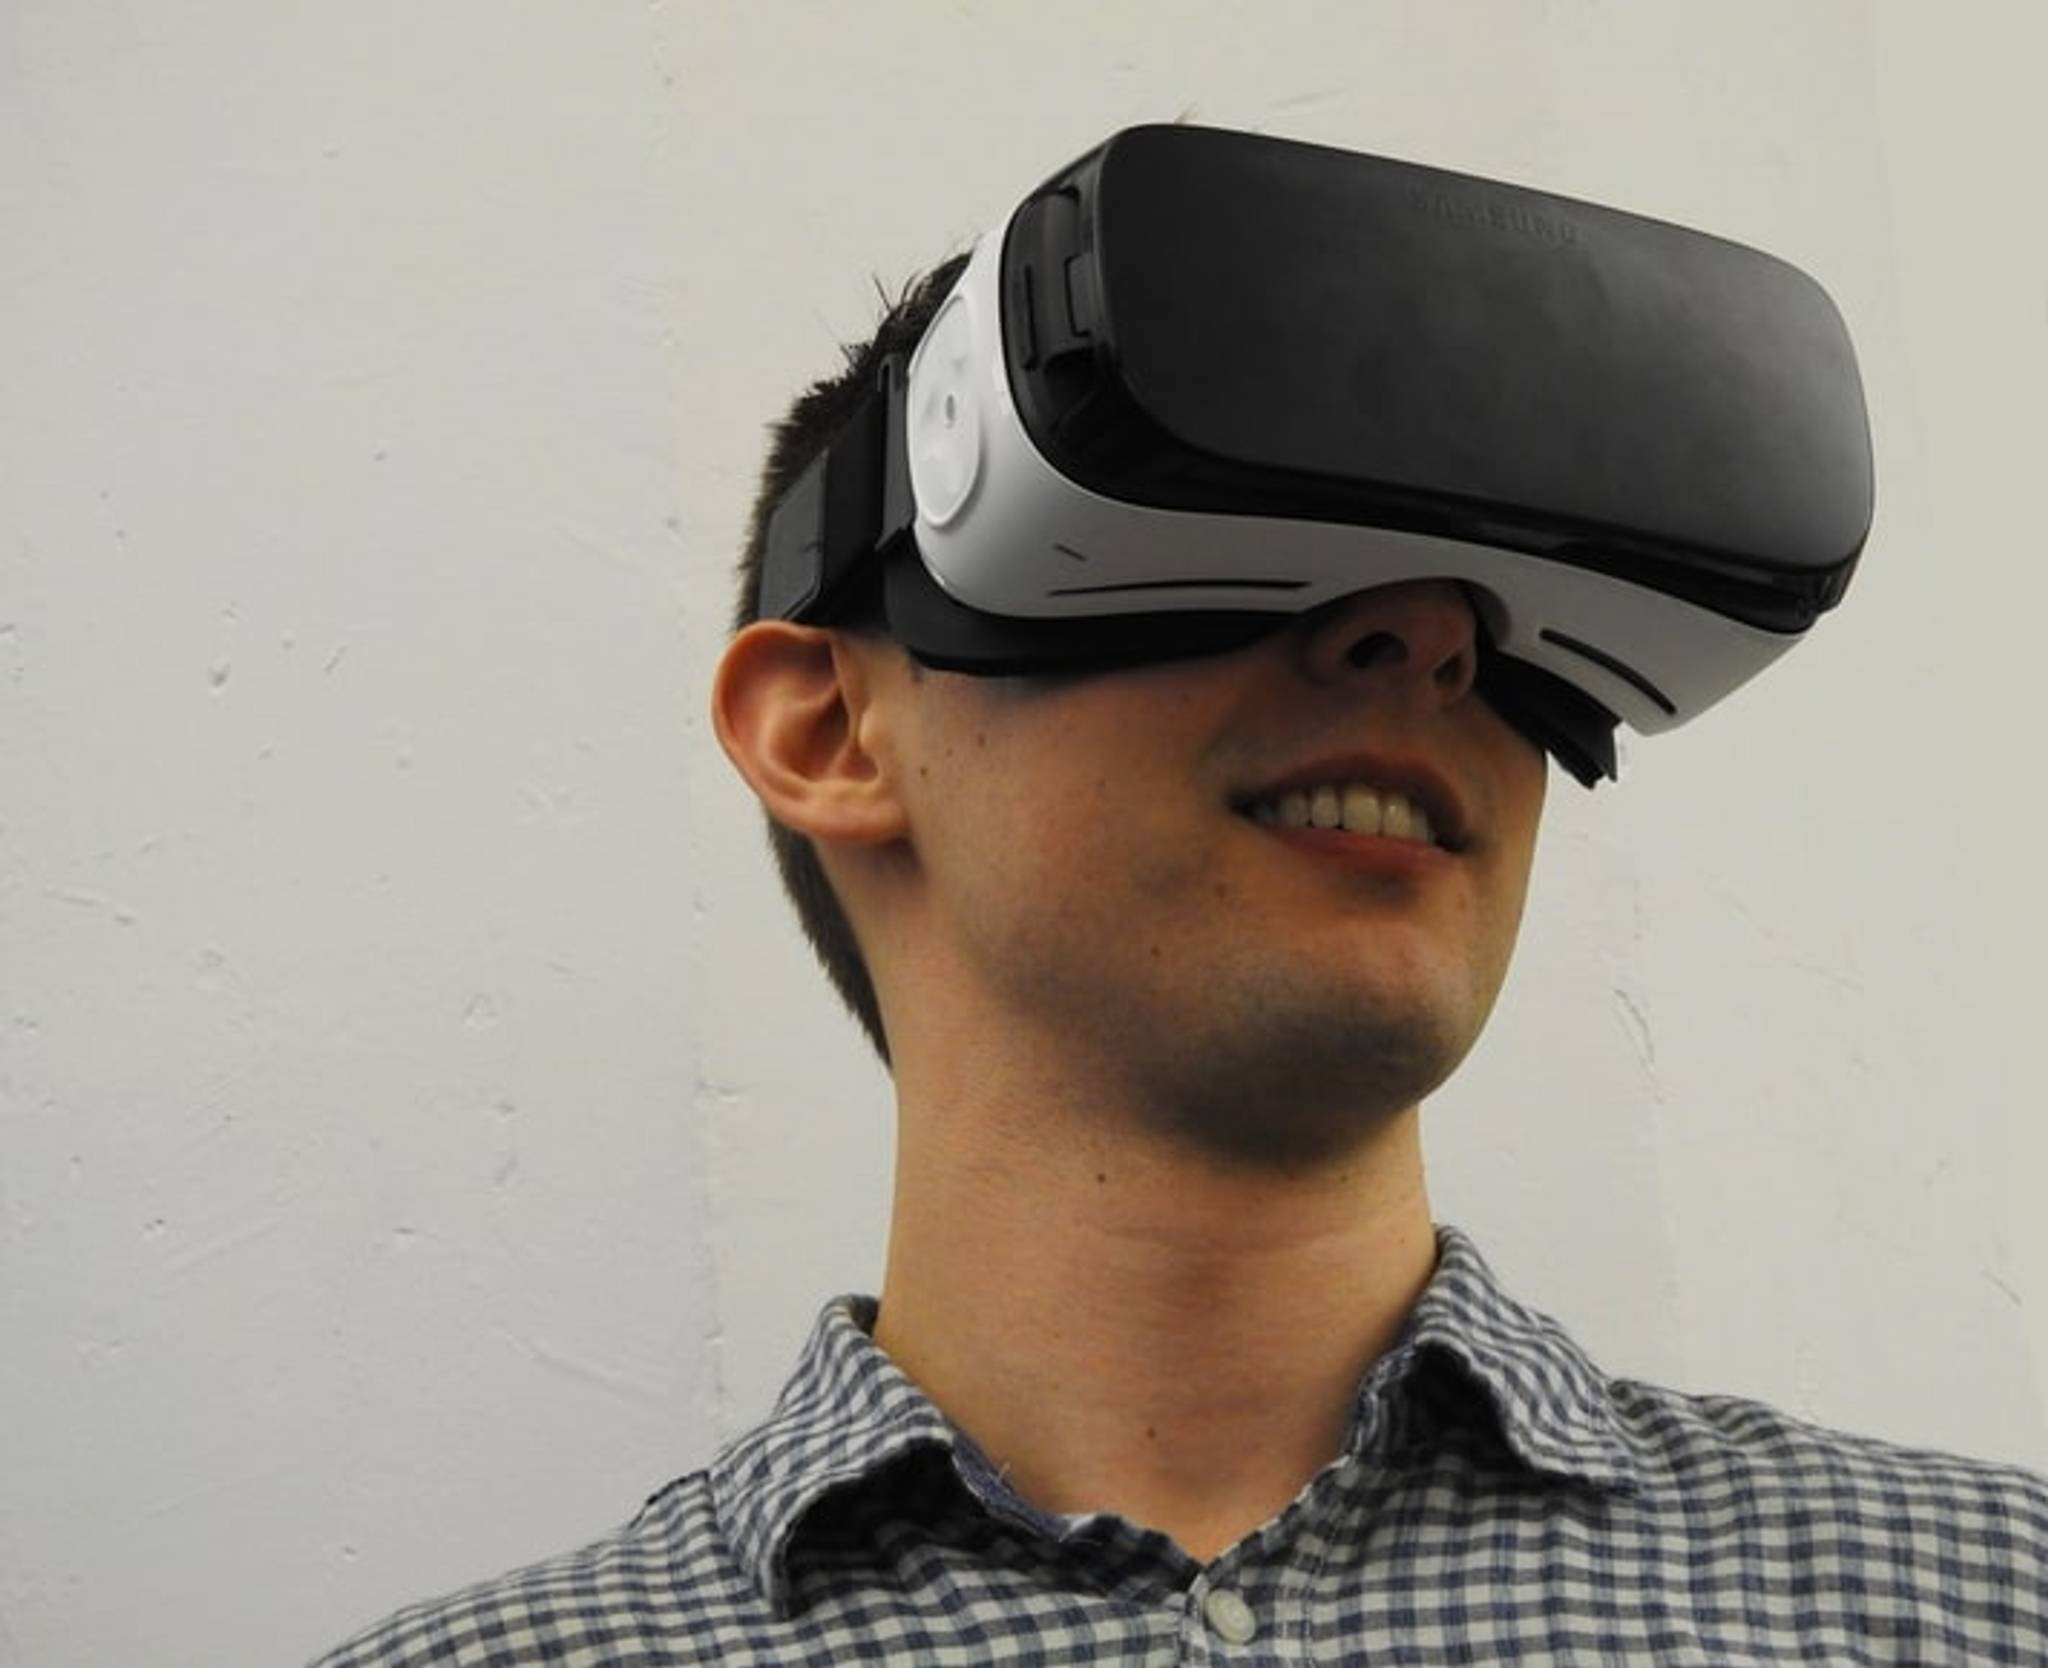 VR helps people with autism adjust to new workplaces